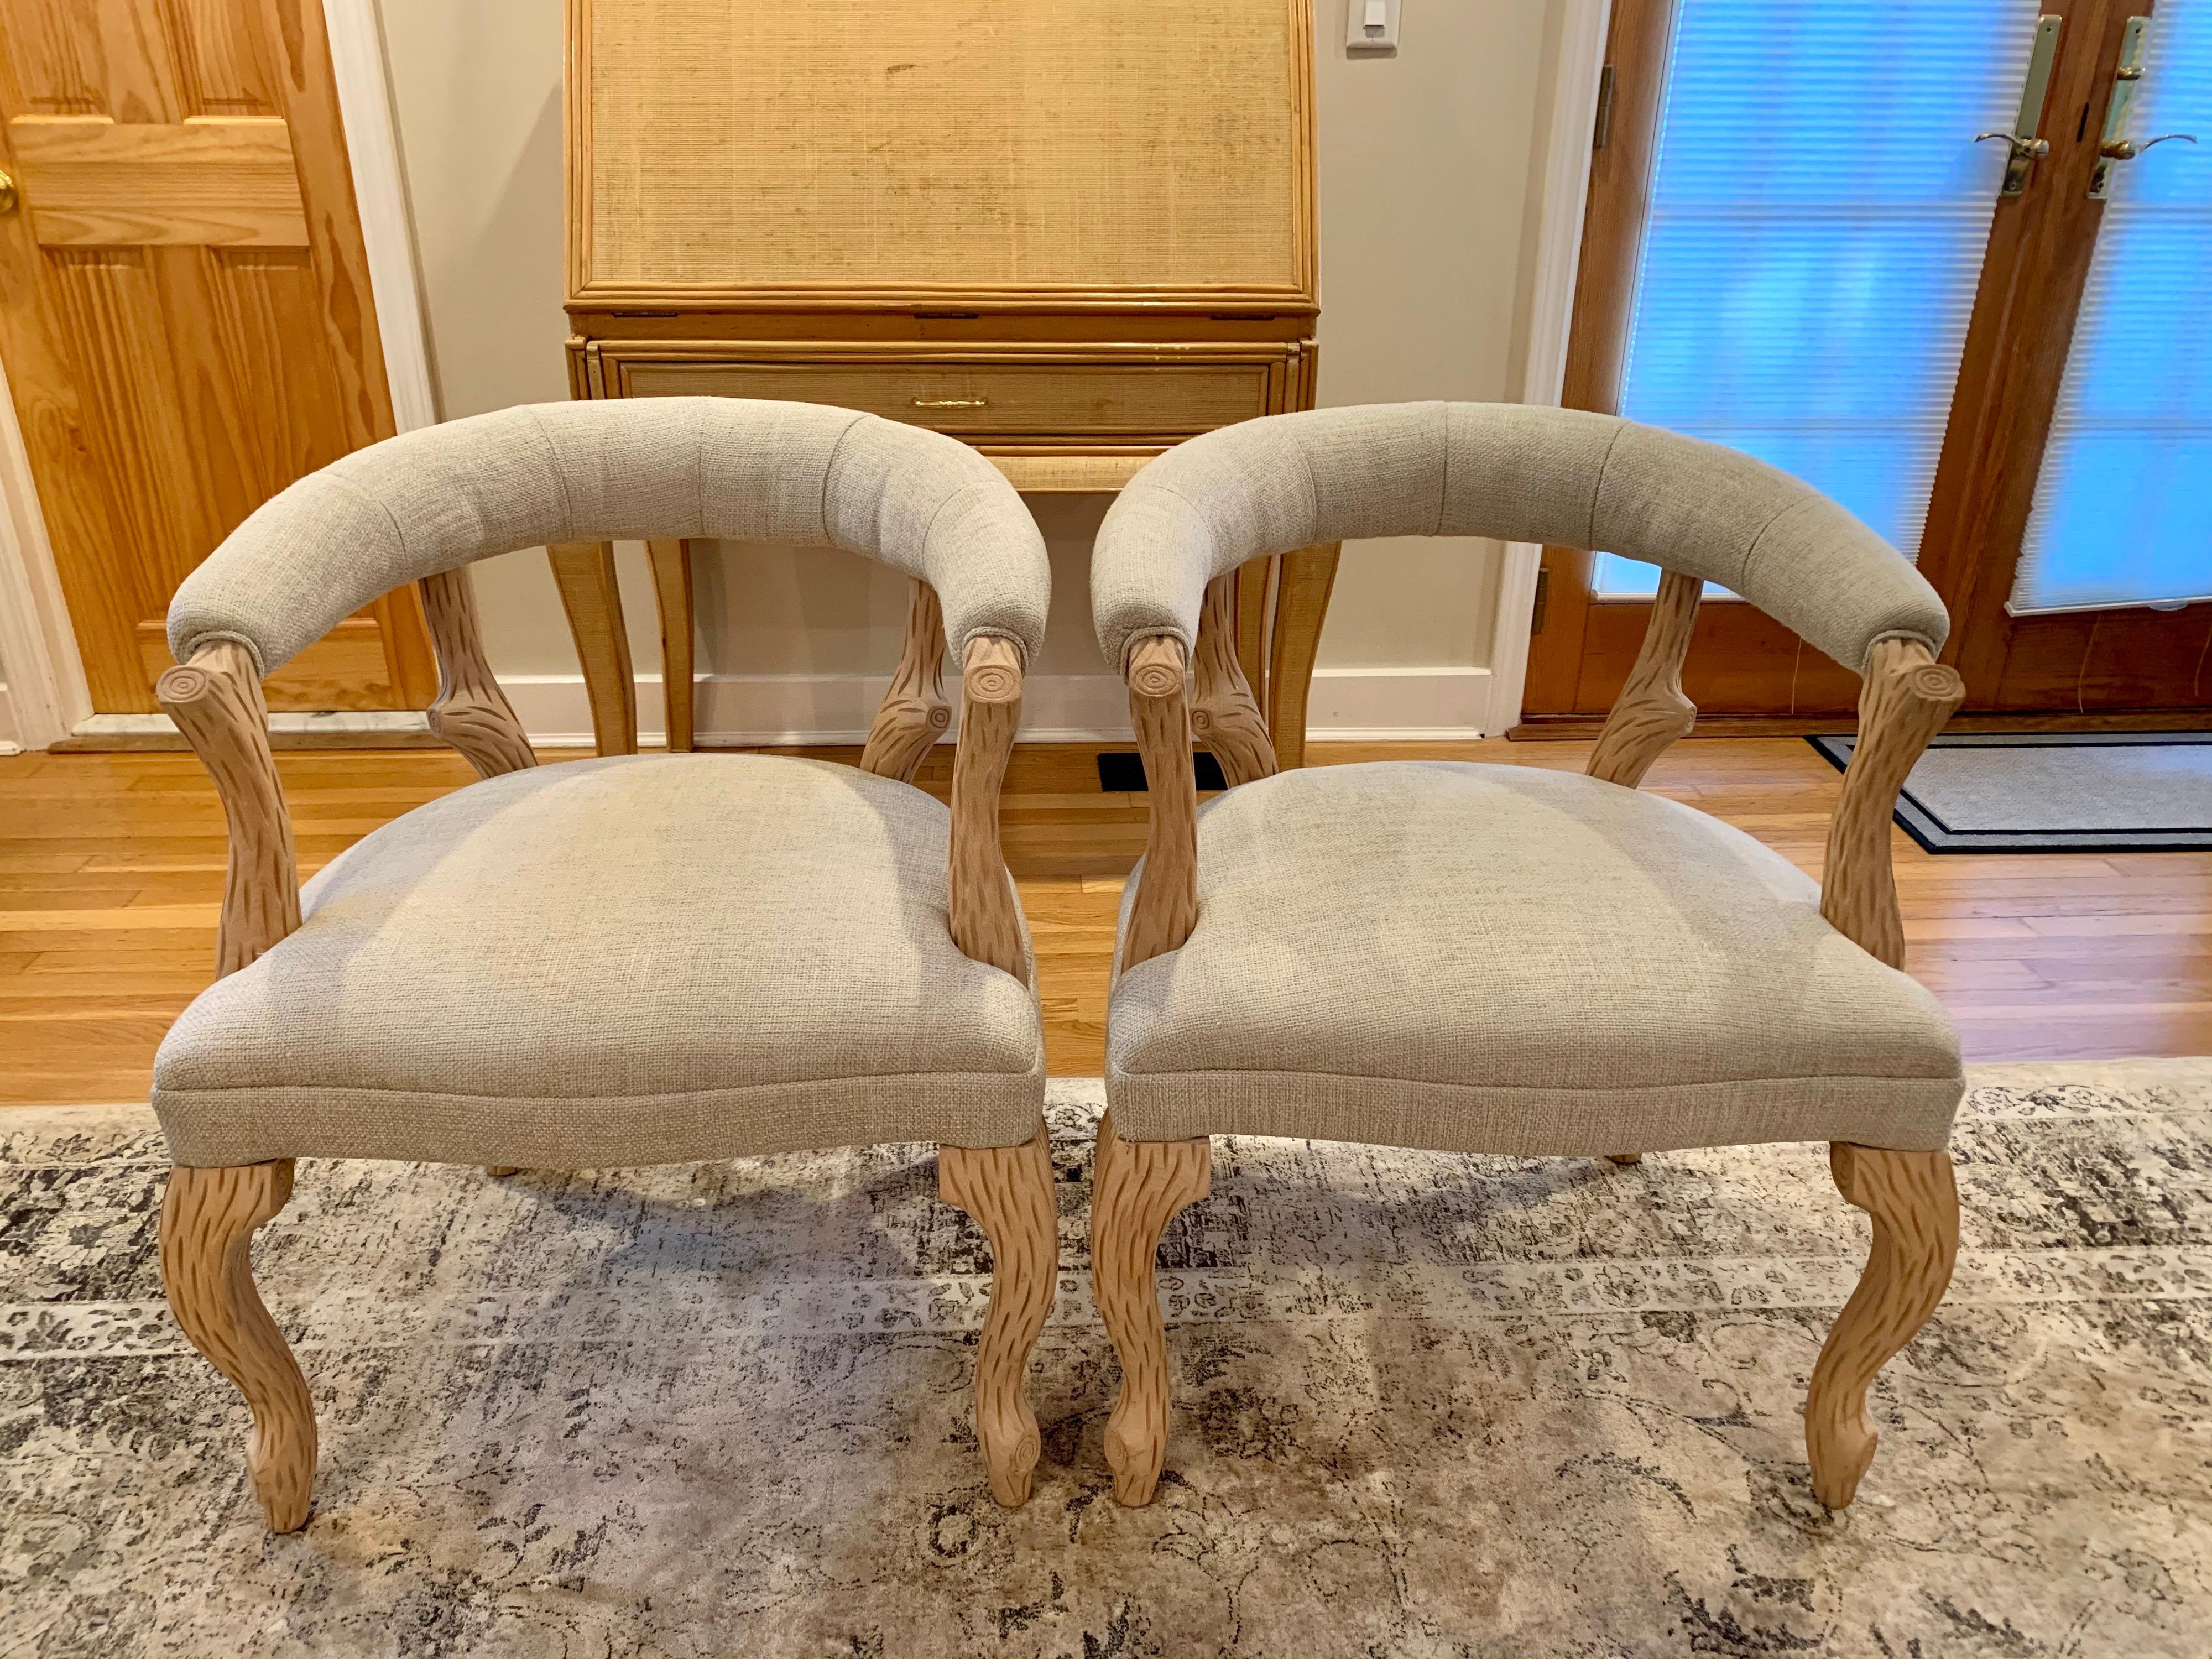 This is a lovely pair of elegant faux bois wood chairs with rounded back in the style of Nina Ditzel. The wood is stripped and bleached to its beautiful natural coloring - very organic.